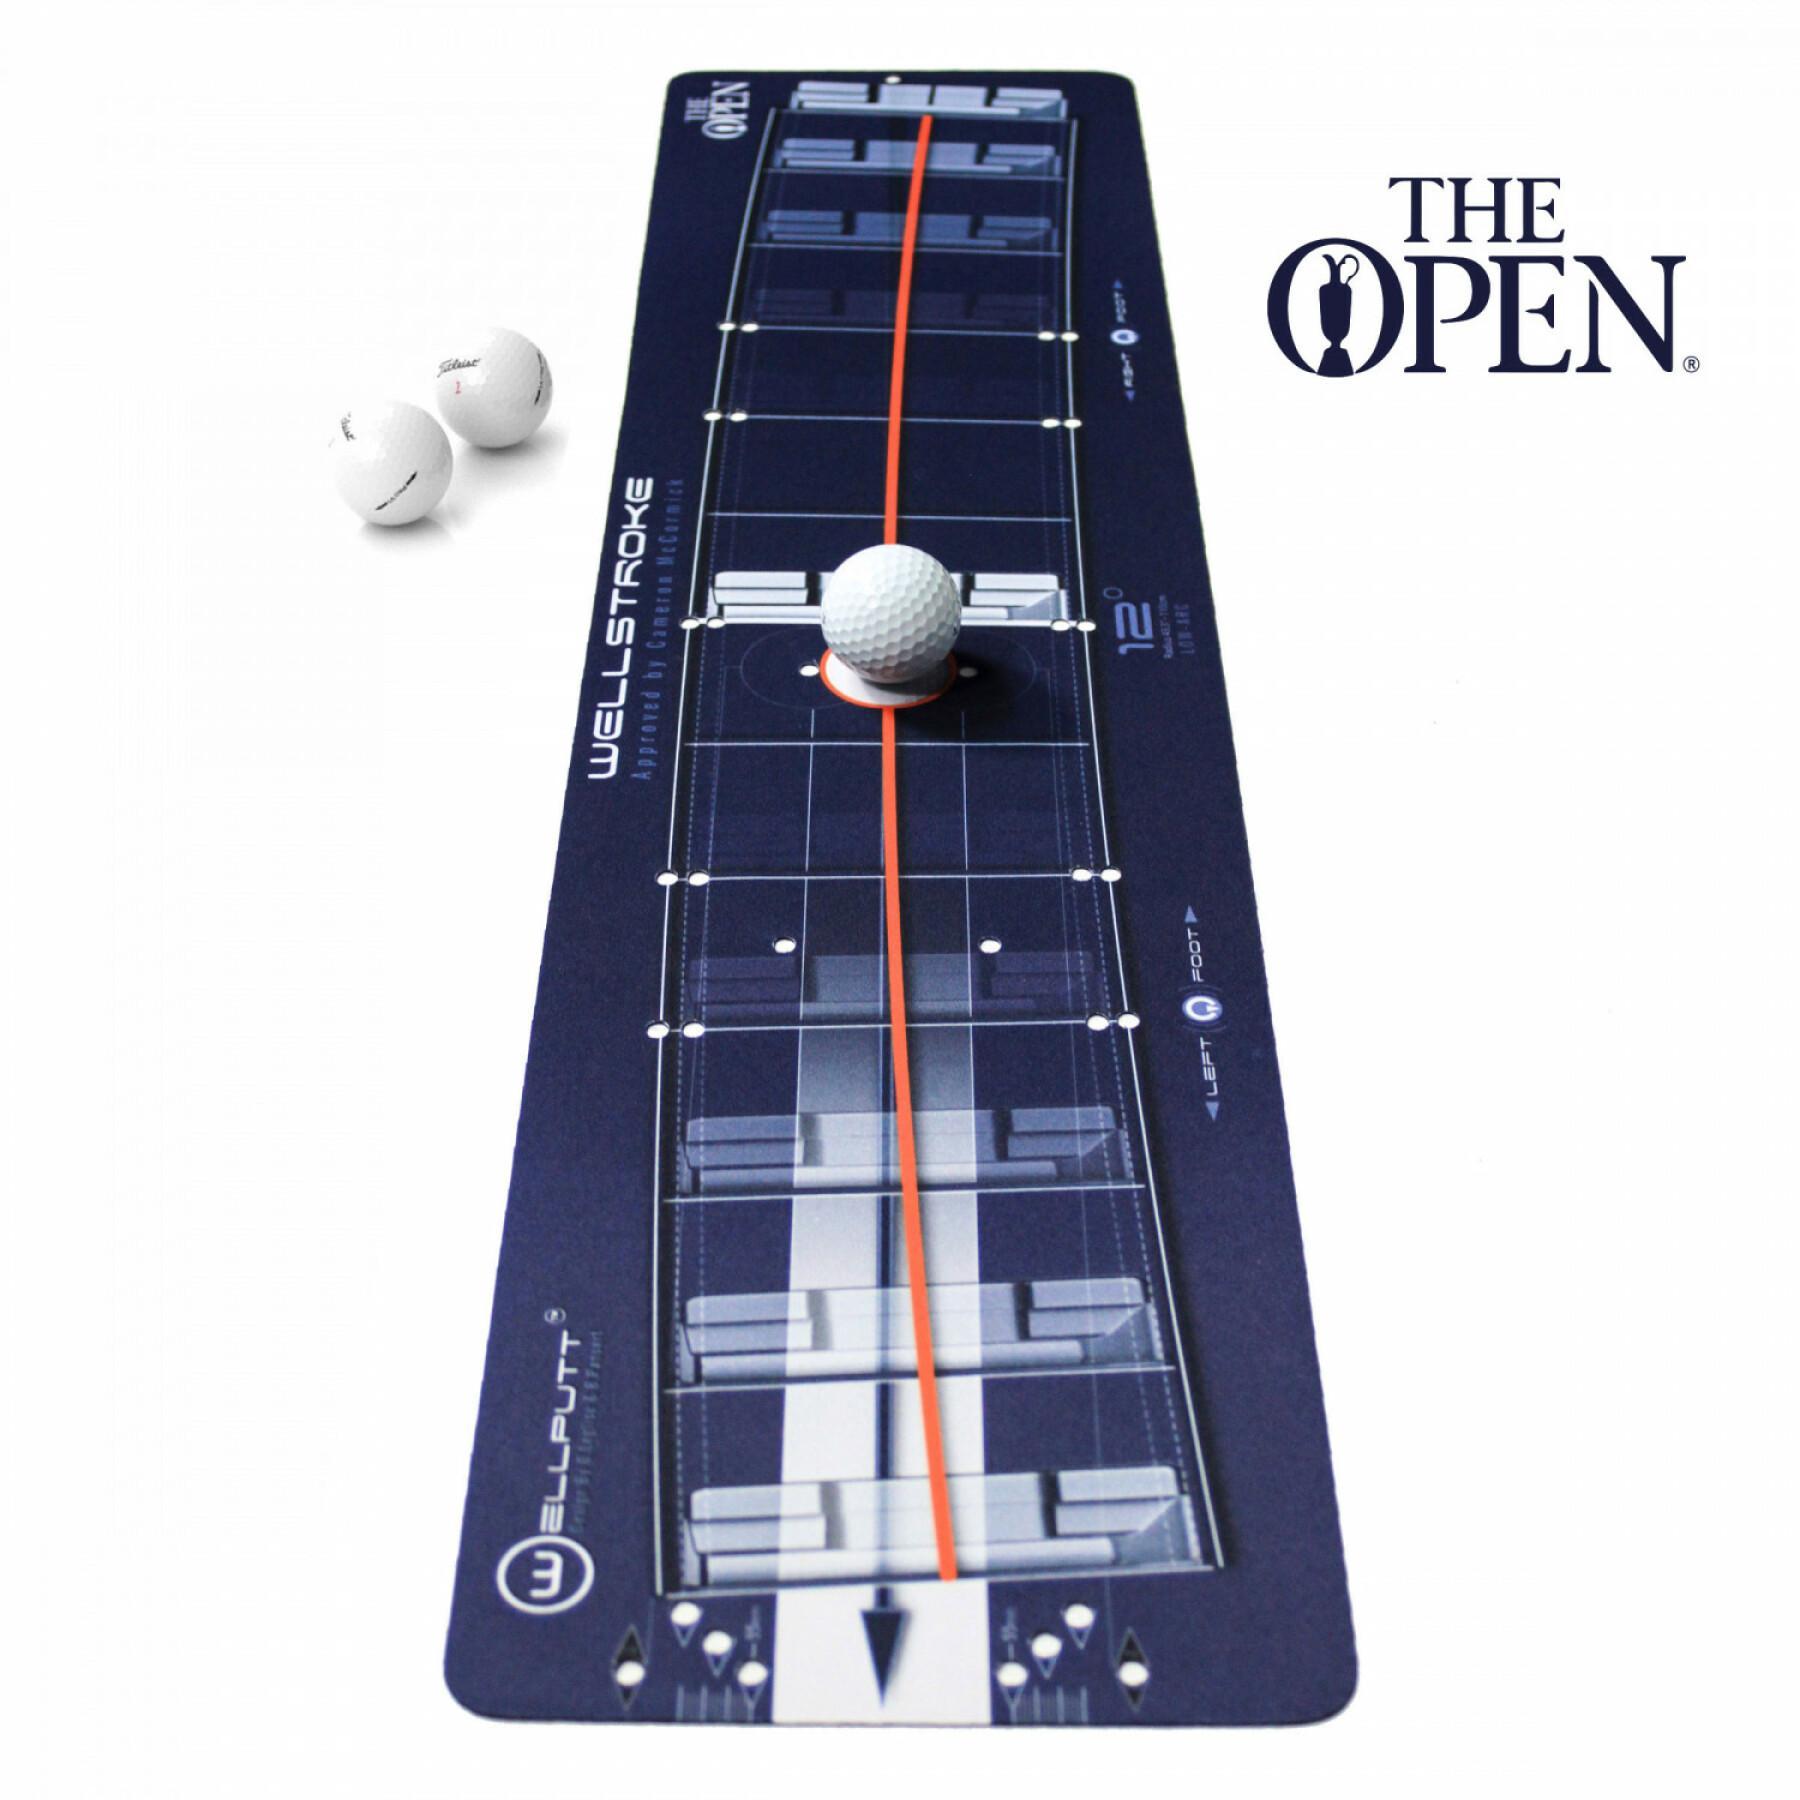 Left-handed putting mat Wellputt Wellstroke 12° The Open Edition Speciale